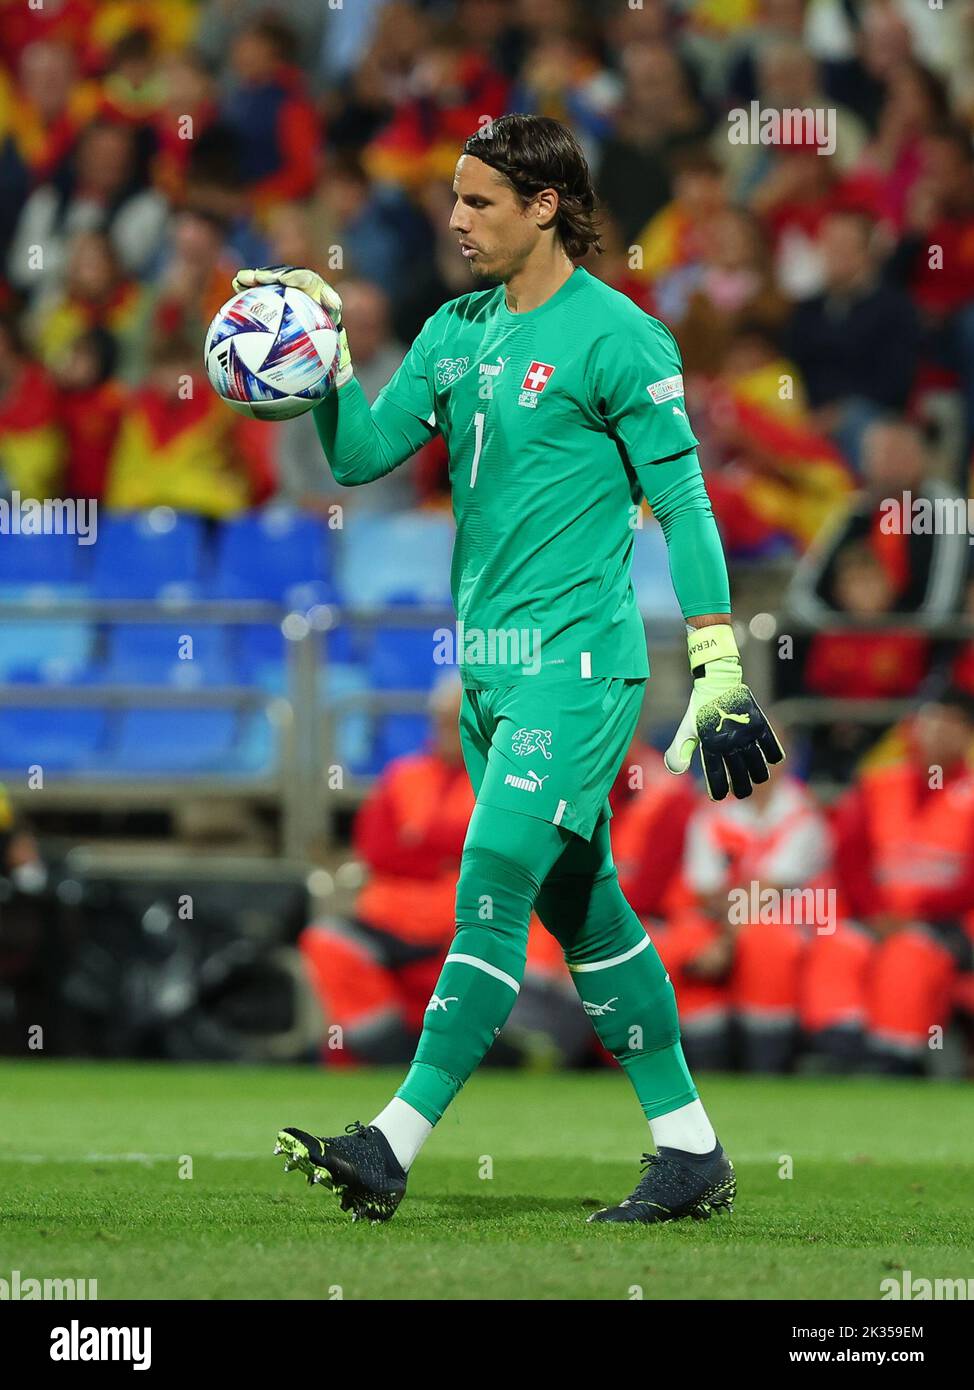 Yann Sommer of Switzerland during the UEFA Nations League League A Group 2 match between Spain and Switzerland at La Romareda on September 24, 2022 in Zaragoza, Spain Stock Photo